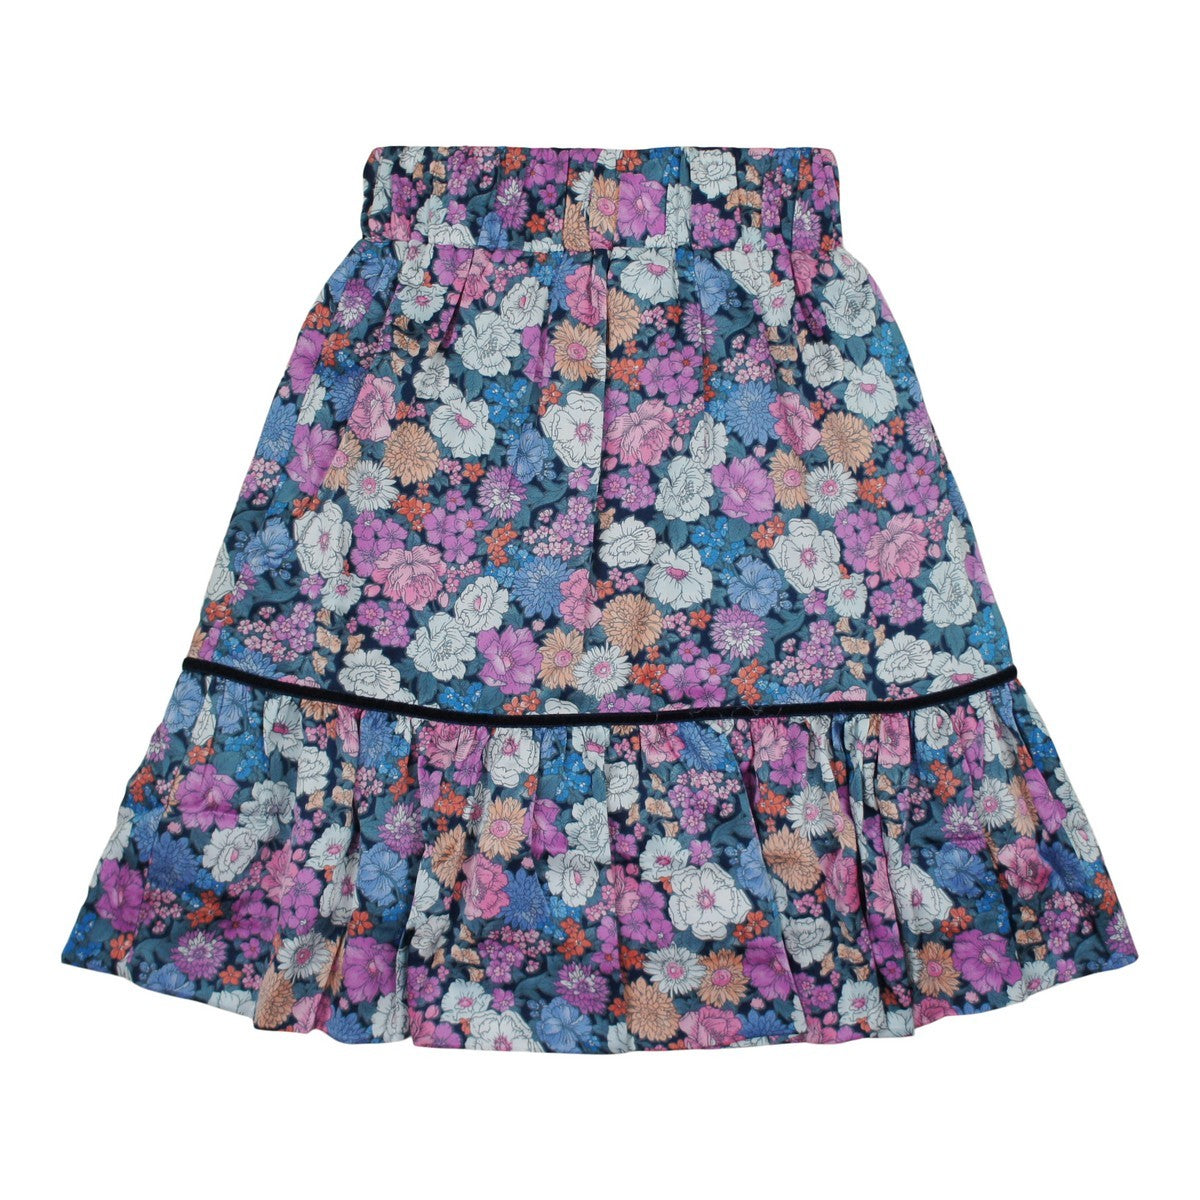 Large Floral Print Ruffle Skirt